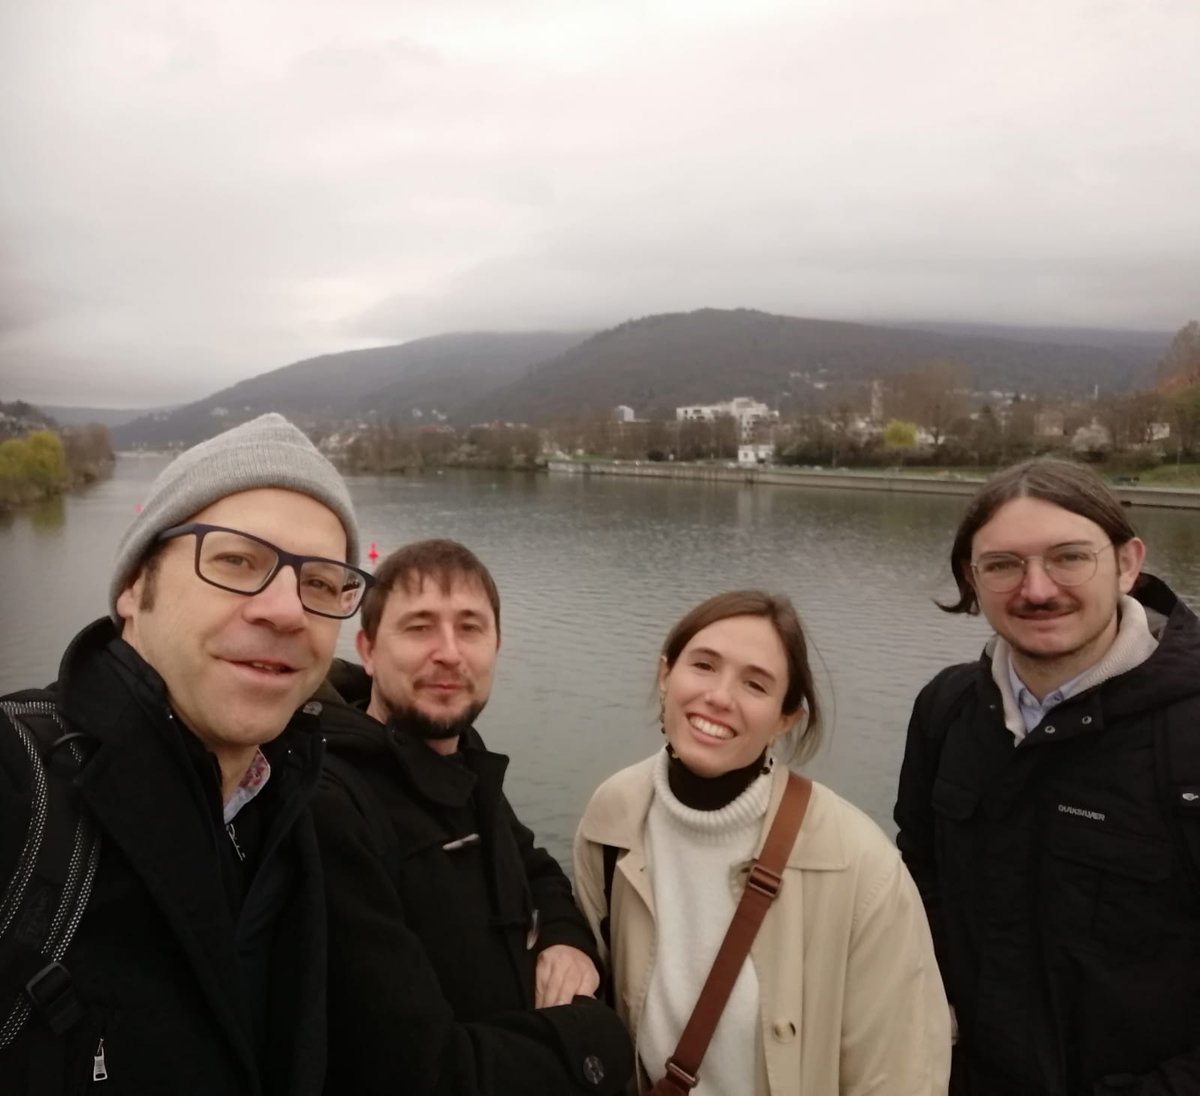 👥 The Mosquito Alert team traveled to #Heidelberg for the @IDAlertproject meeting with Work Package 5 members. 🌾 We shared initial findings from our #Empordà Wetlands research and planned the next steps. 🔜 Stay tuned! Don't miss the upcoming experiments! #MosquitoResearch